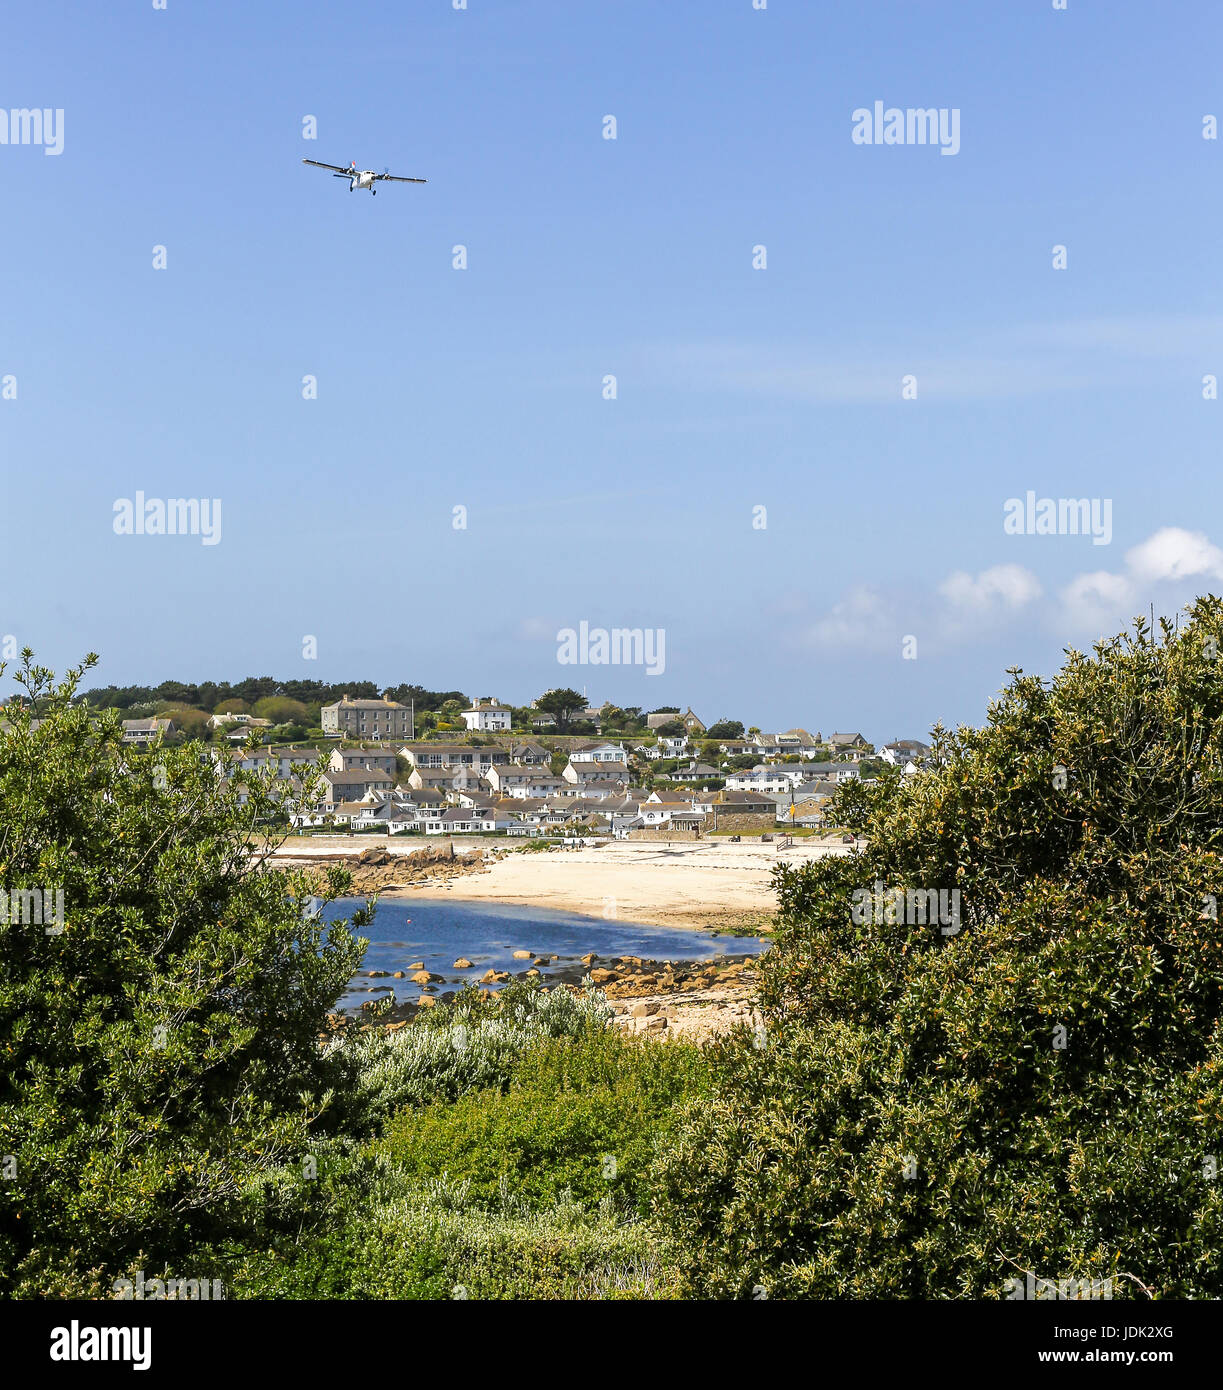 A plane coming in to land at St. Mary's airport over Porthcressa beach and Bay Hugh Town, St. Mary's Island, Isles of Scilly, Cornwall, England, UK Stock Photo